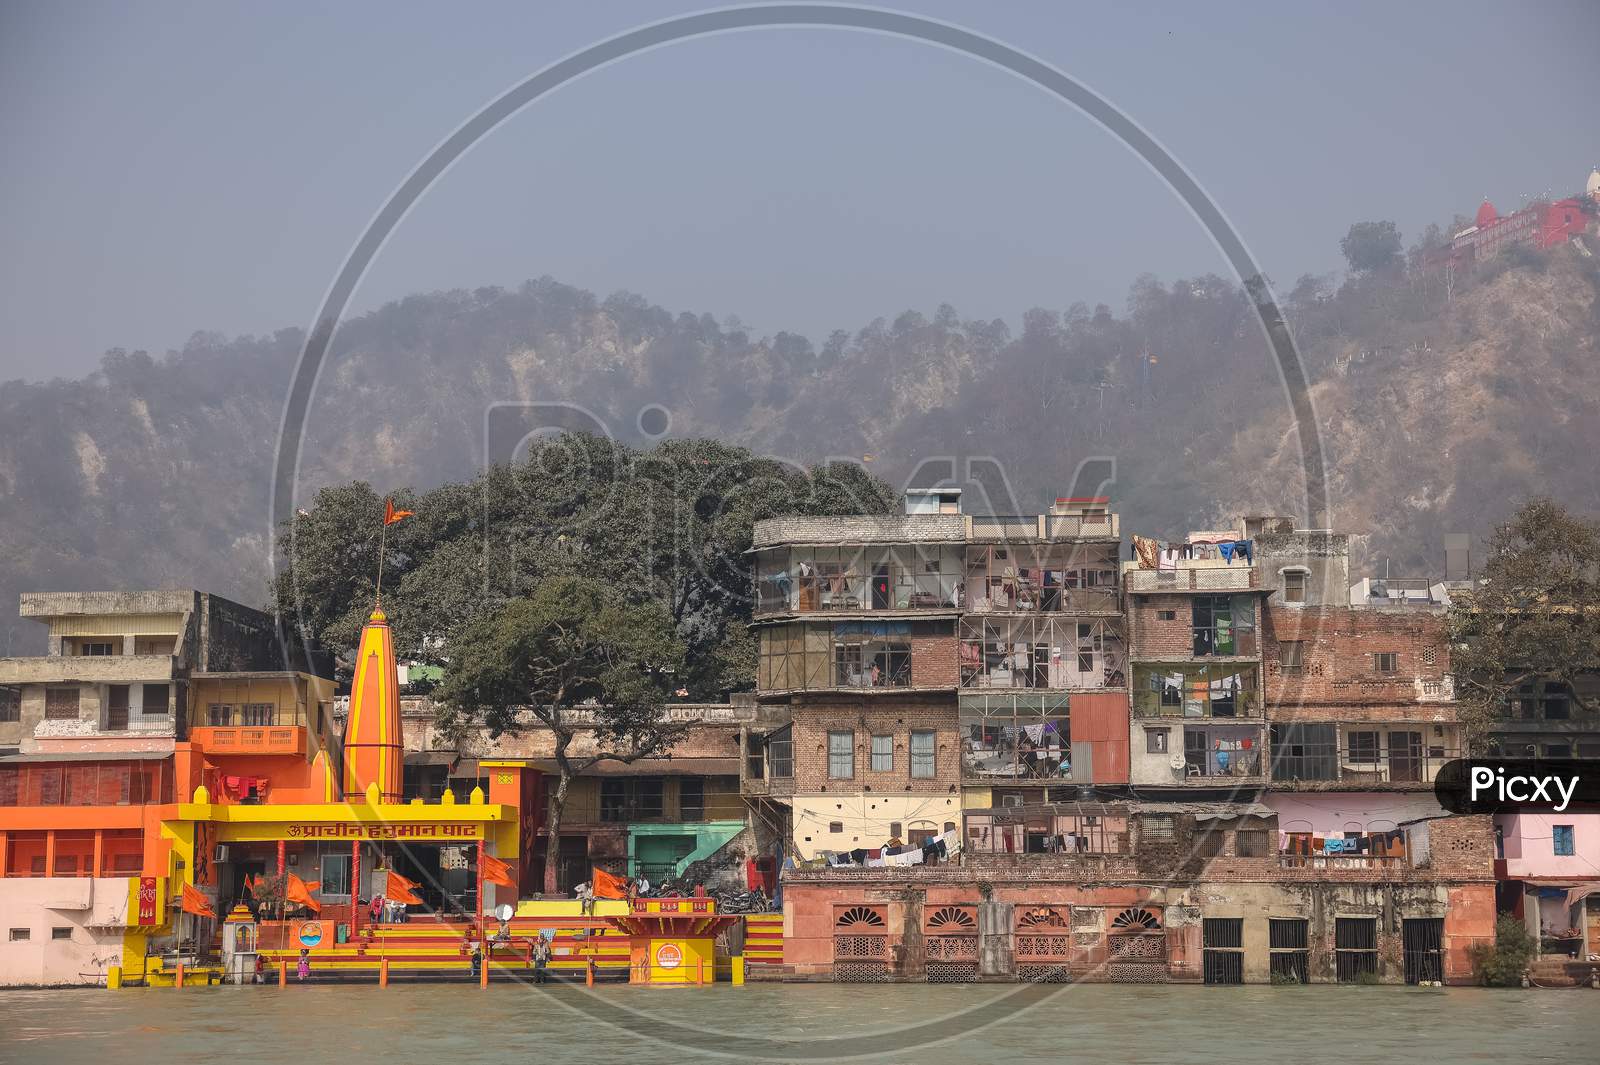 Architectural view of Bridges and colorful building in Kumbh fair at Haridwar